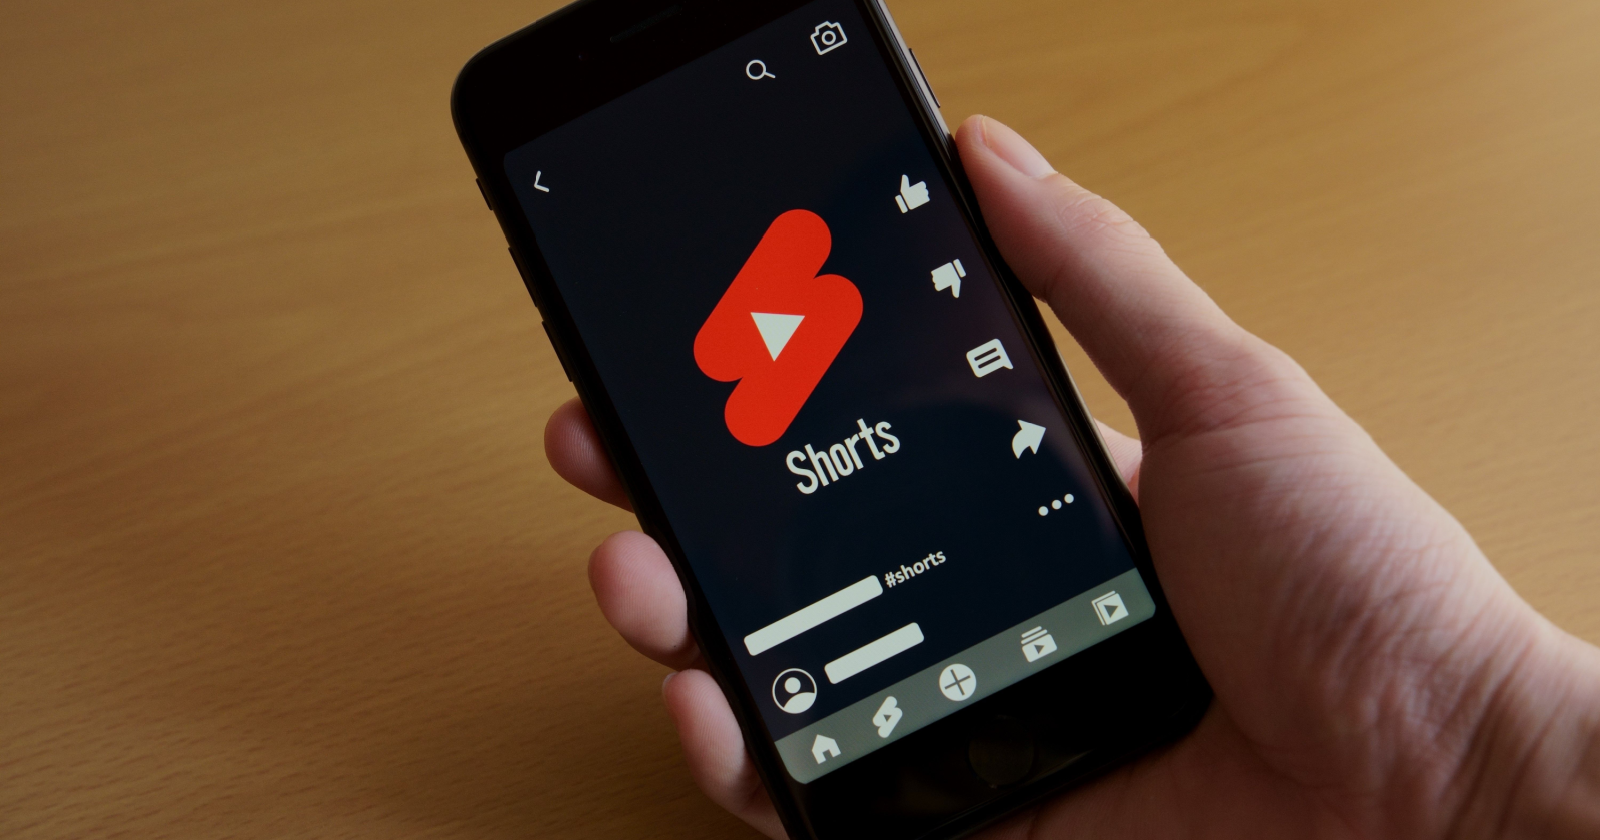 Shorts Monetization: What Creators Need To Know